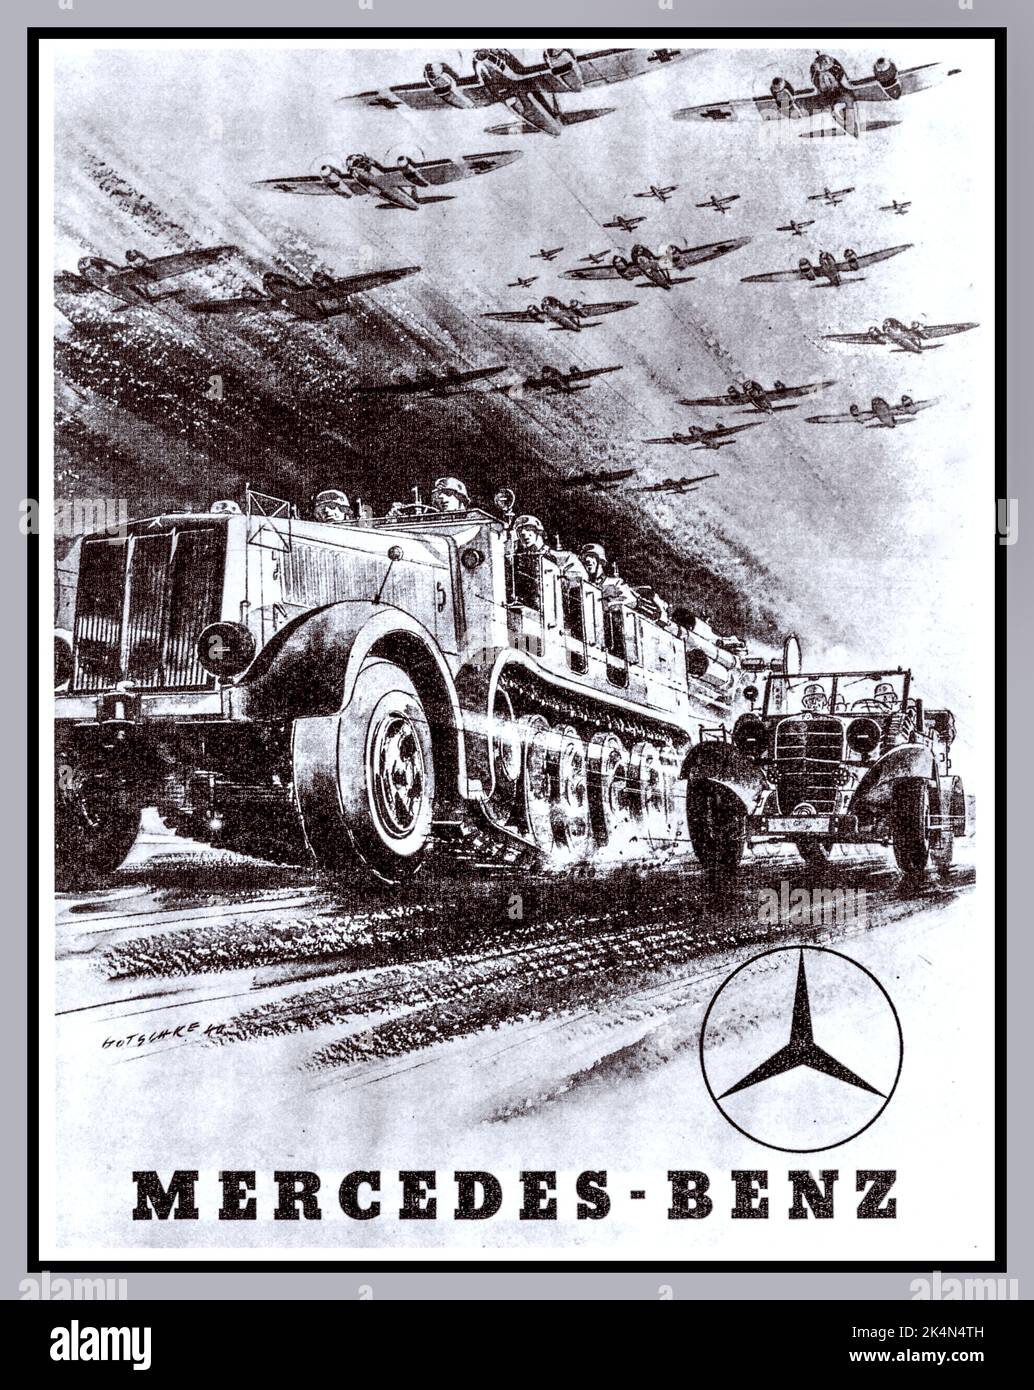 Mercedes WW2 Industrial War Production Poster. Troop carriers, personnel transport, aircraft engines etc. Nazi war work mechanised transport. World War II Second World War Nazi Germany Stock Photo